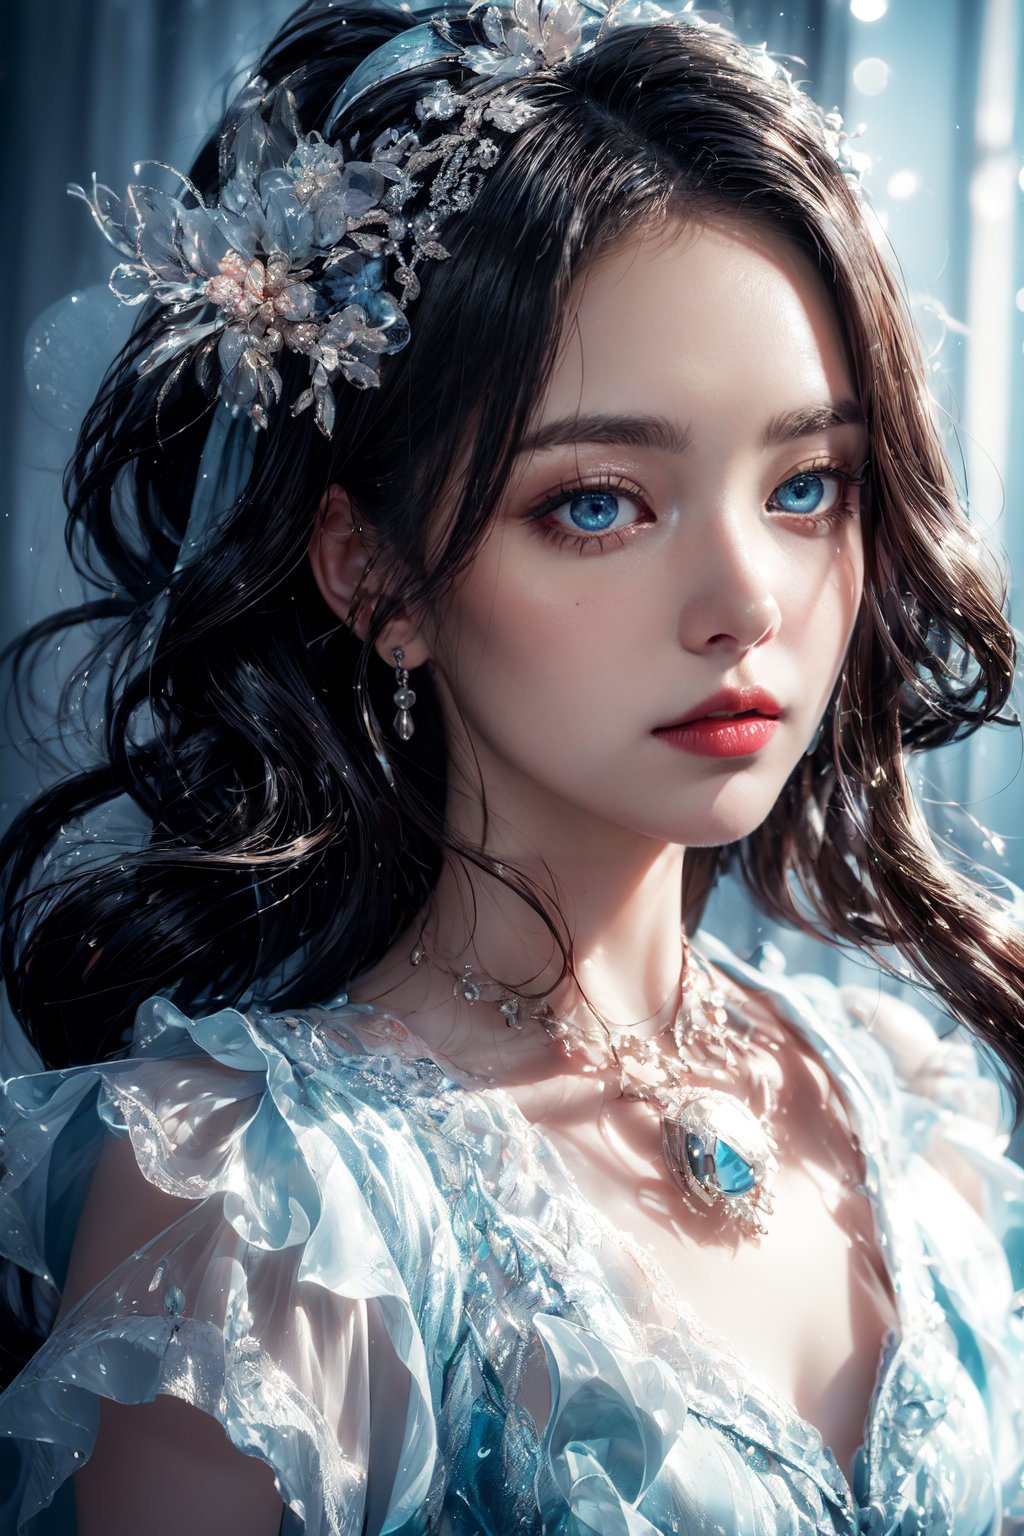 "(masterpiece, high quality:1.5), 8K, HDR, 
1girl, well_defined_face, well_defined_eyes, ultra_detailed_eyes, ultra_detailed_face, by FuturEvoLab, 
ethereal lighting, immortal, elegant, porcelain skin, jet-black hair, waves, pale face, ice-blue eyes, blood-red lips, pinhole photograph, retro aesthetic, monochromatic backdrop, mysterious, enigmatic, timeless allure, siren of the night, secrets, longing, hidden dangers, captivating, nostalgia, timeless fascination, "